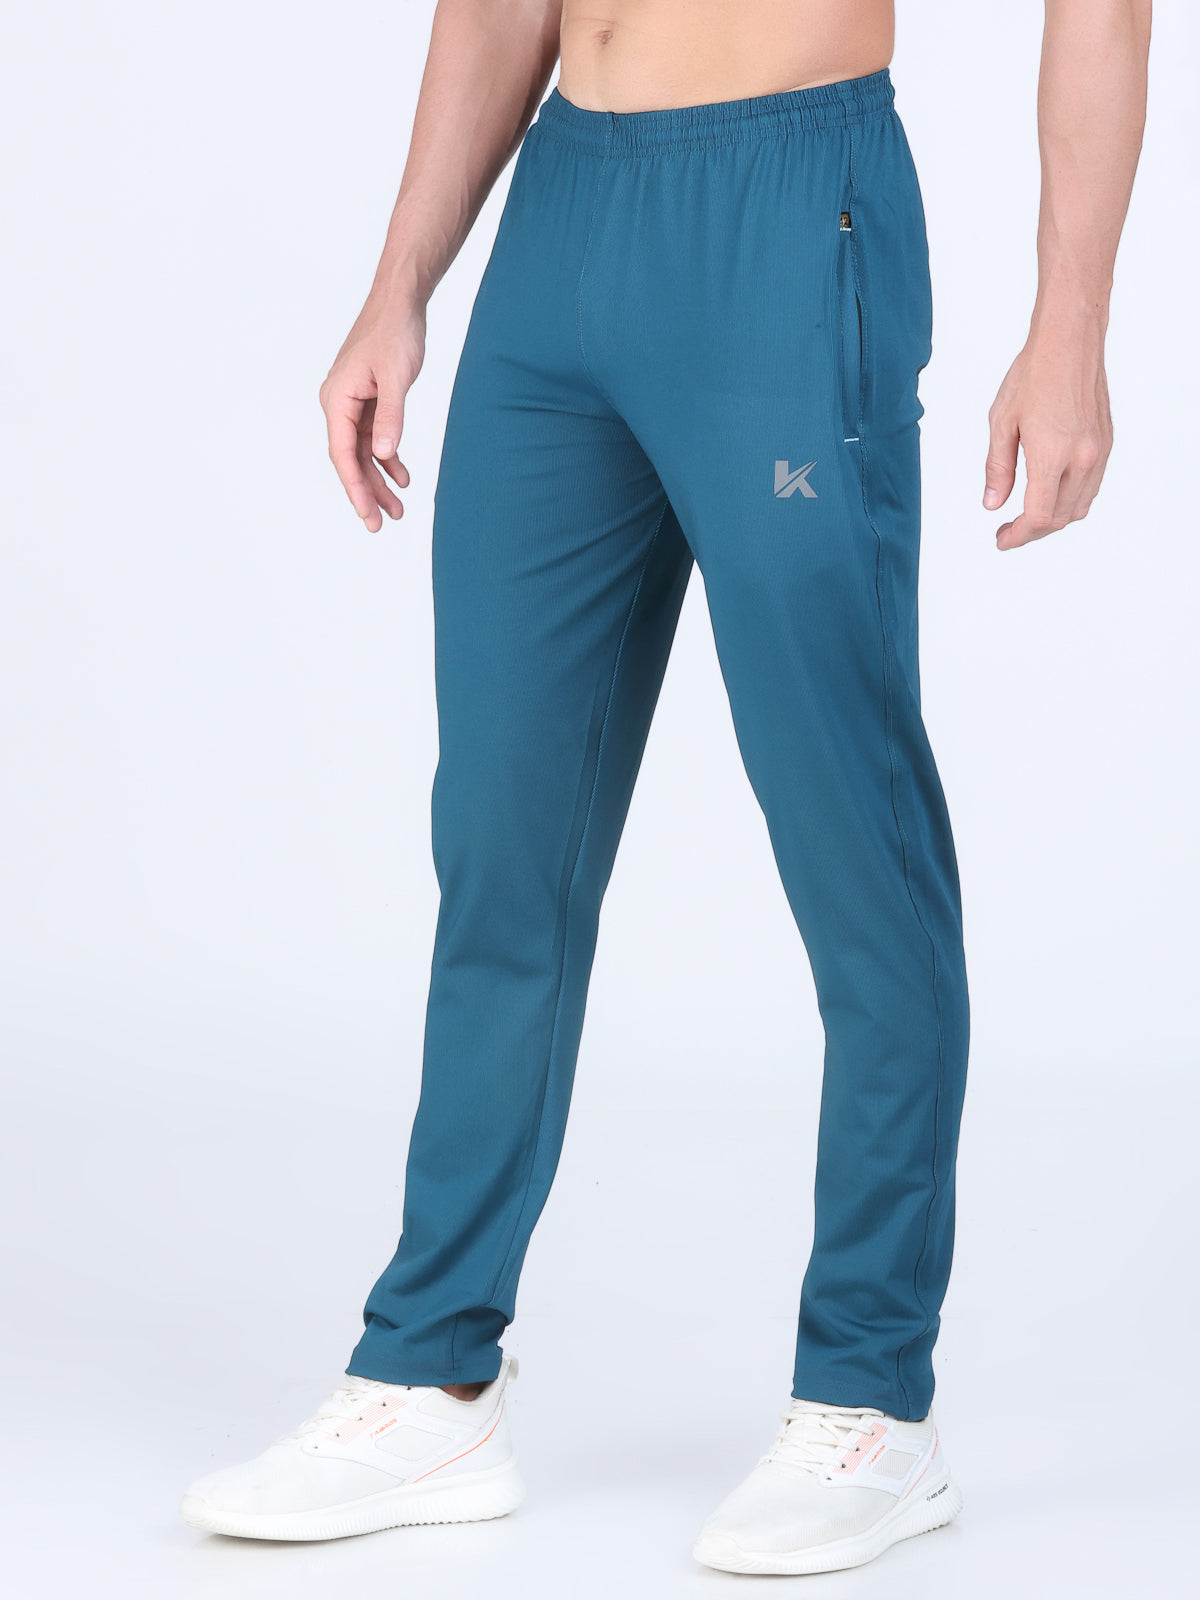 Combo of 2 Men's 4 Way Stretch Lining Bottle Green and Tourquoise Track Pant